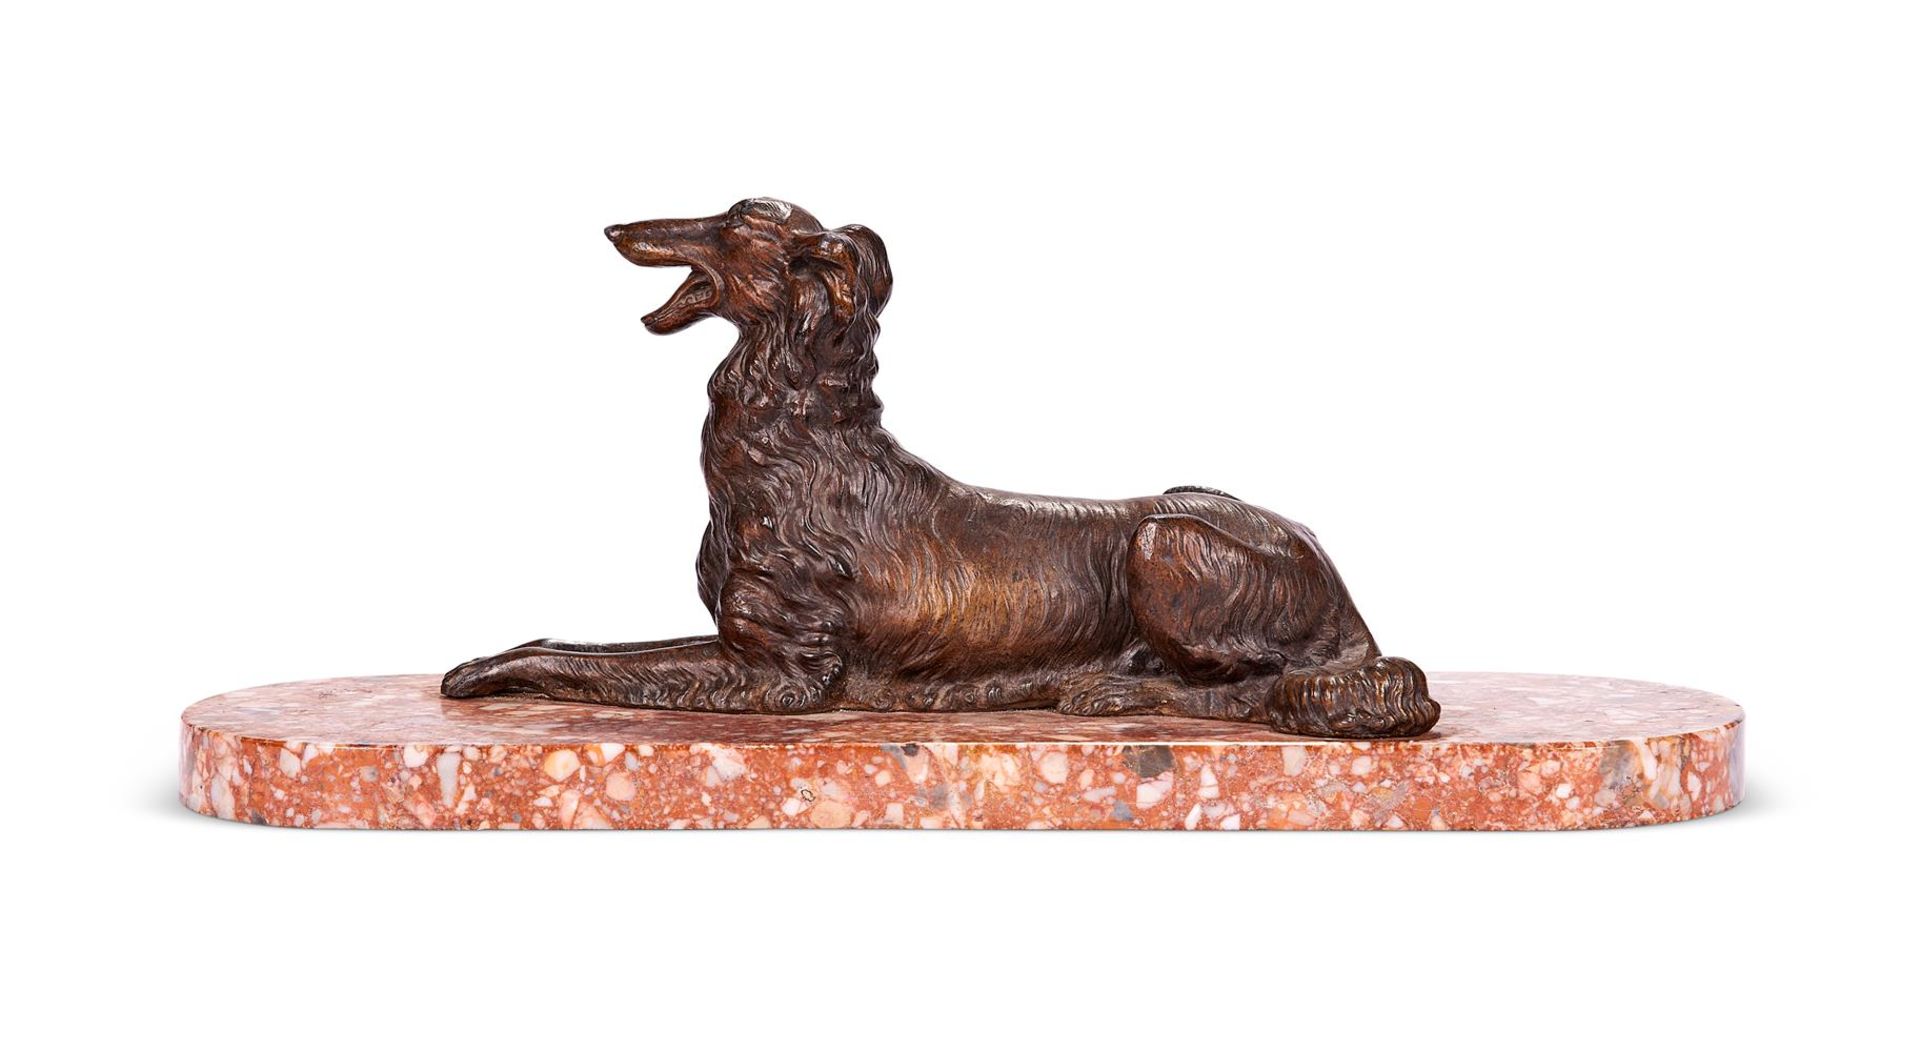 A SPELTER ANIMALIER FIGURE OF A BORZOI DOG, EARLY 20TH CENTURY